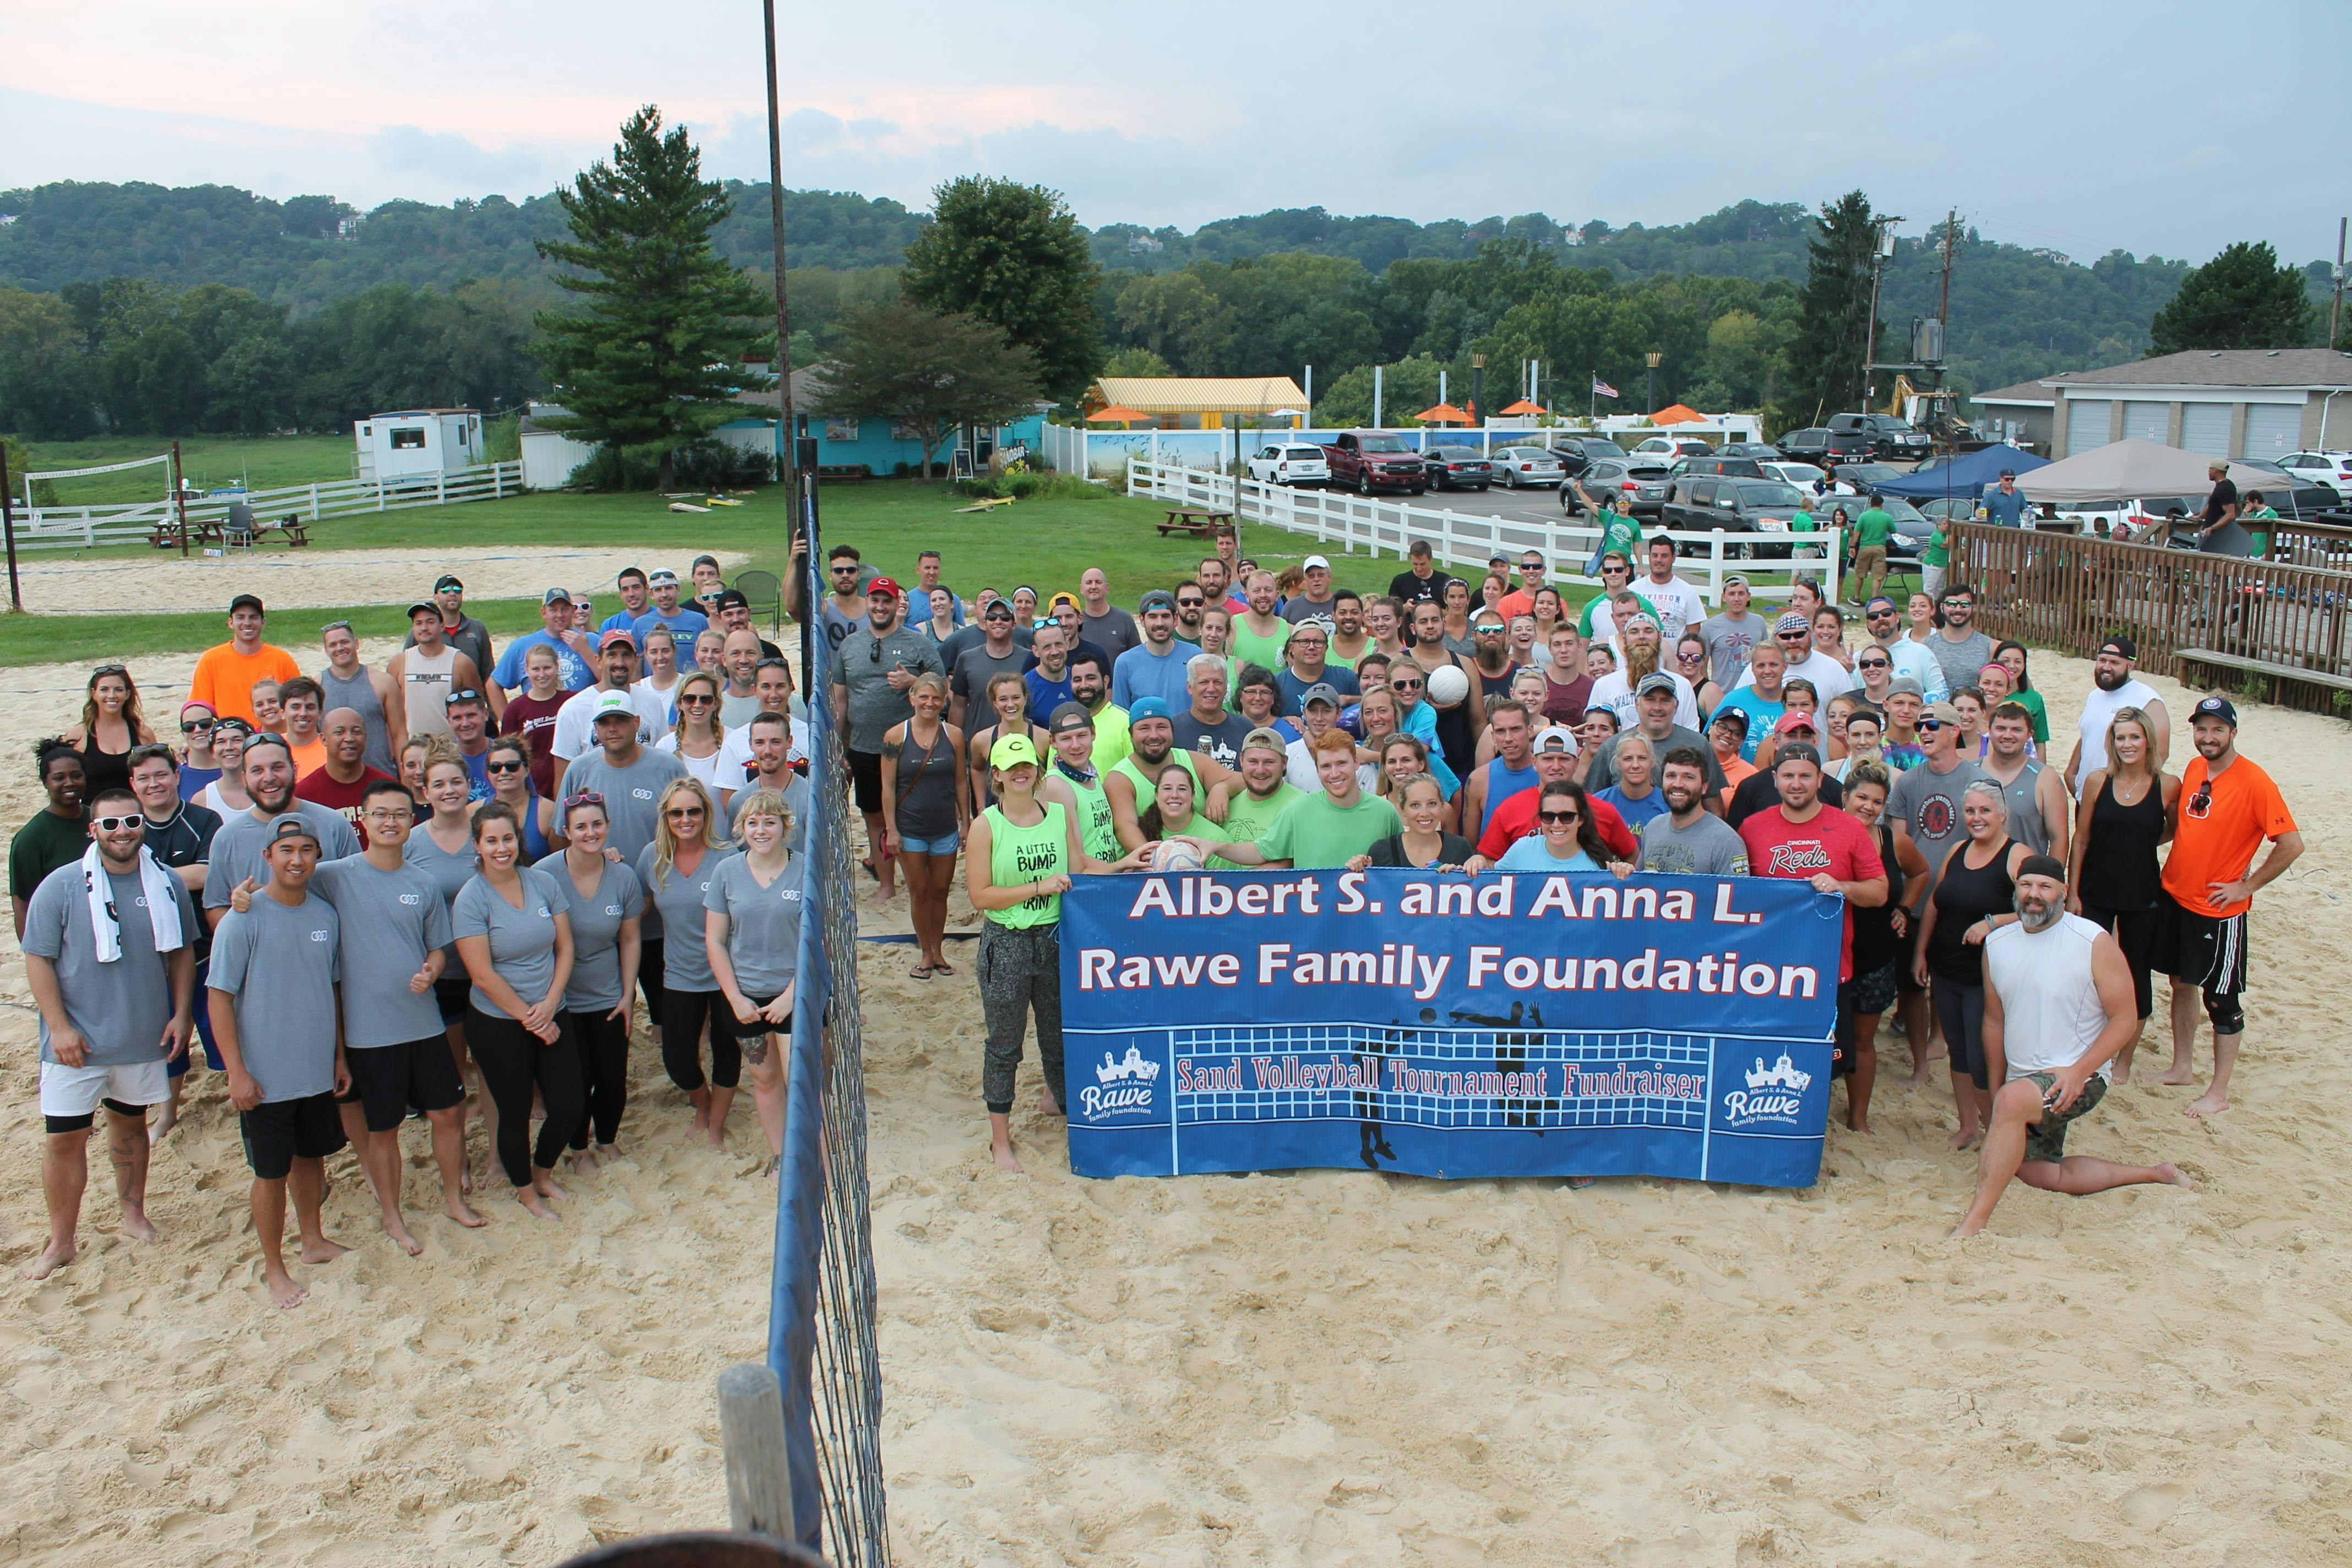 7th Annual Rawe Family Foundation Sand Volleyball Tournament Fundraiser